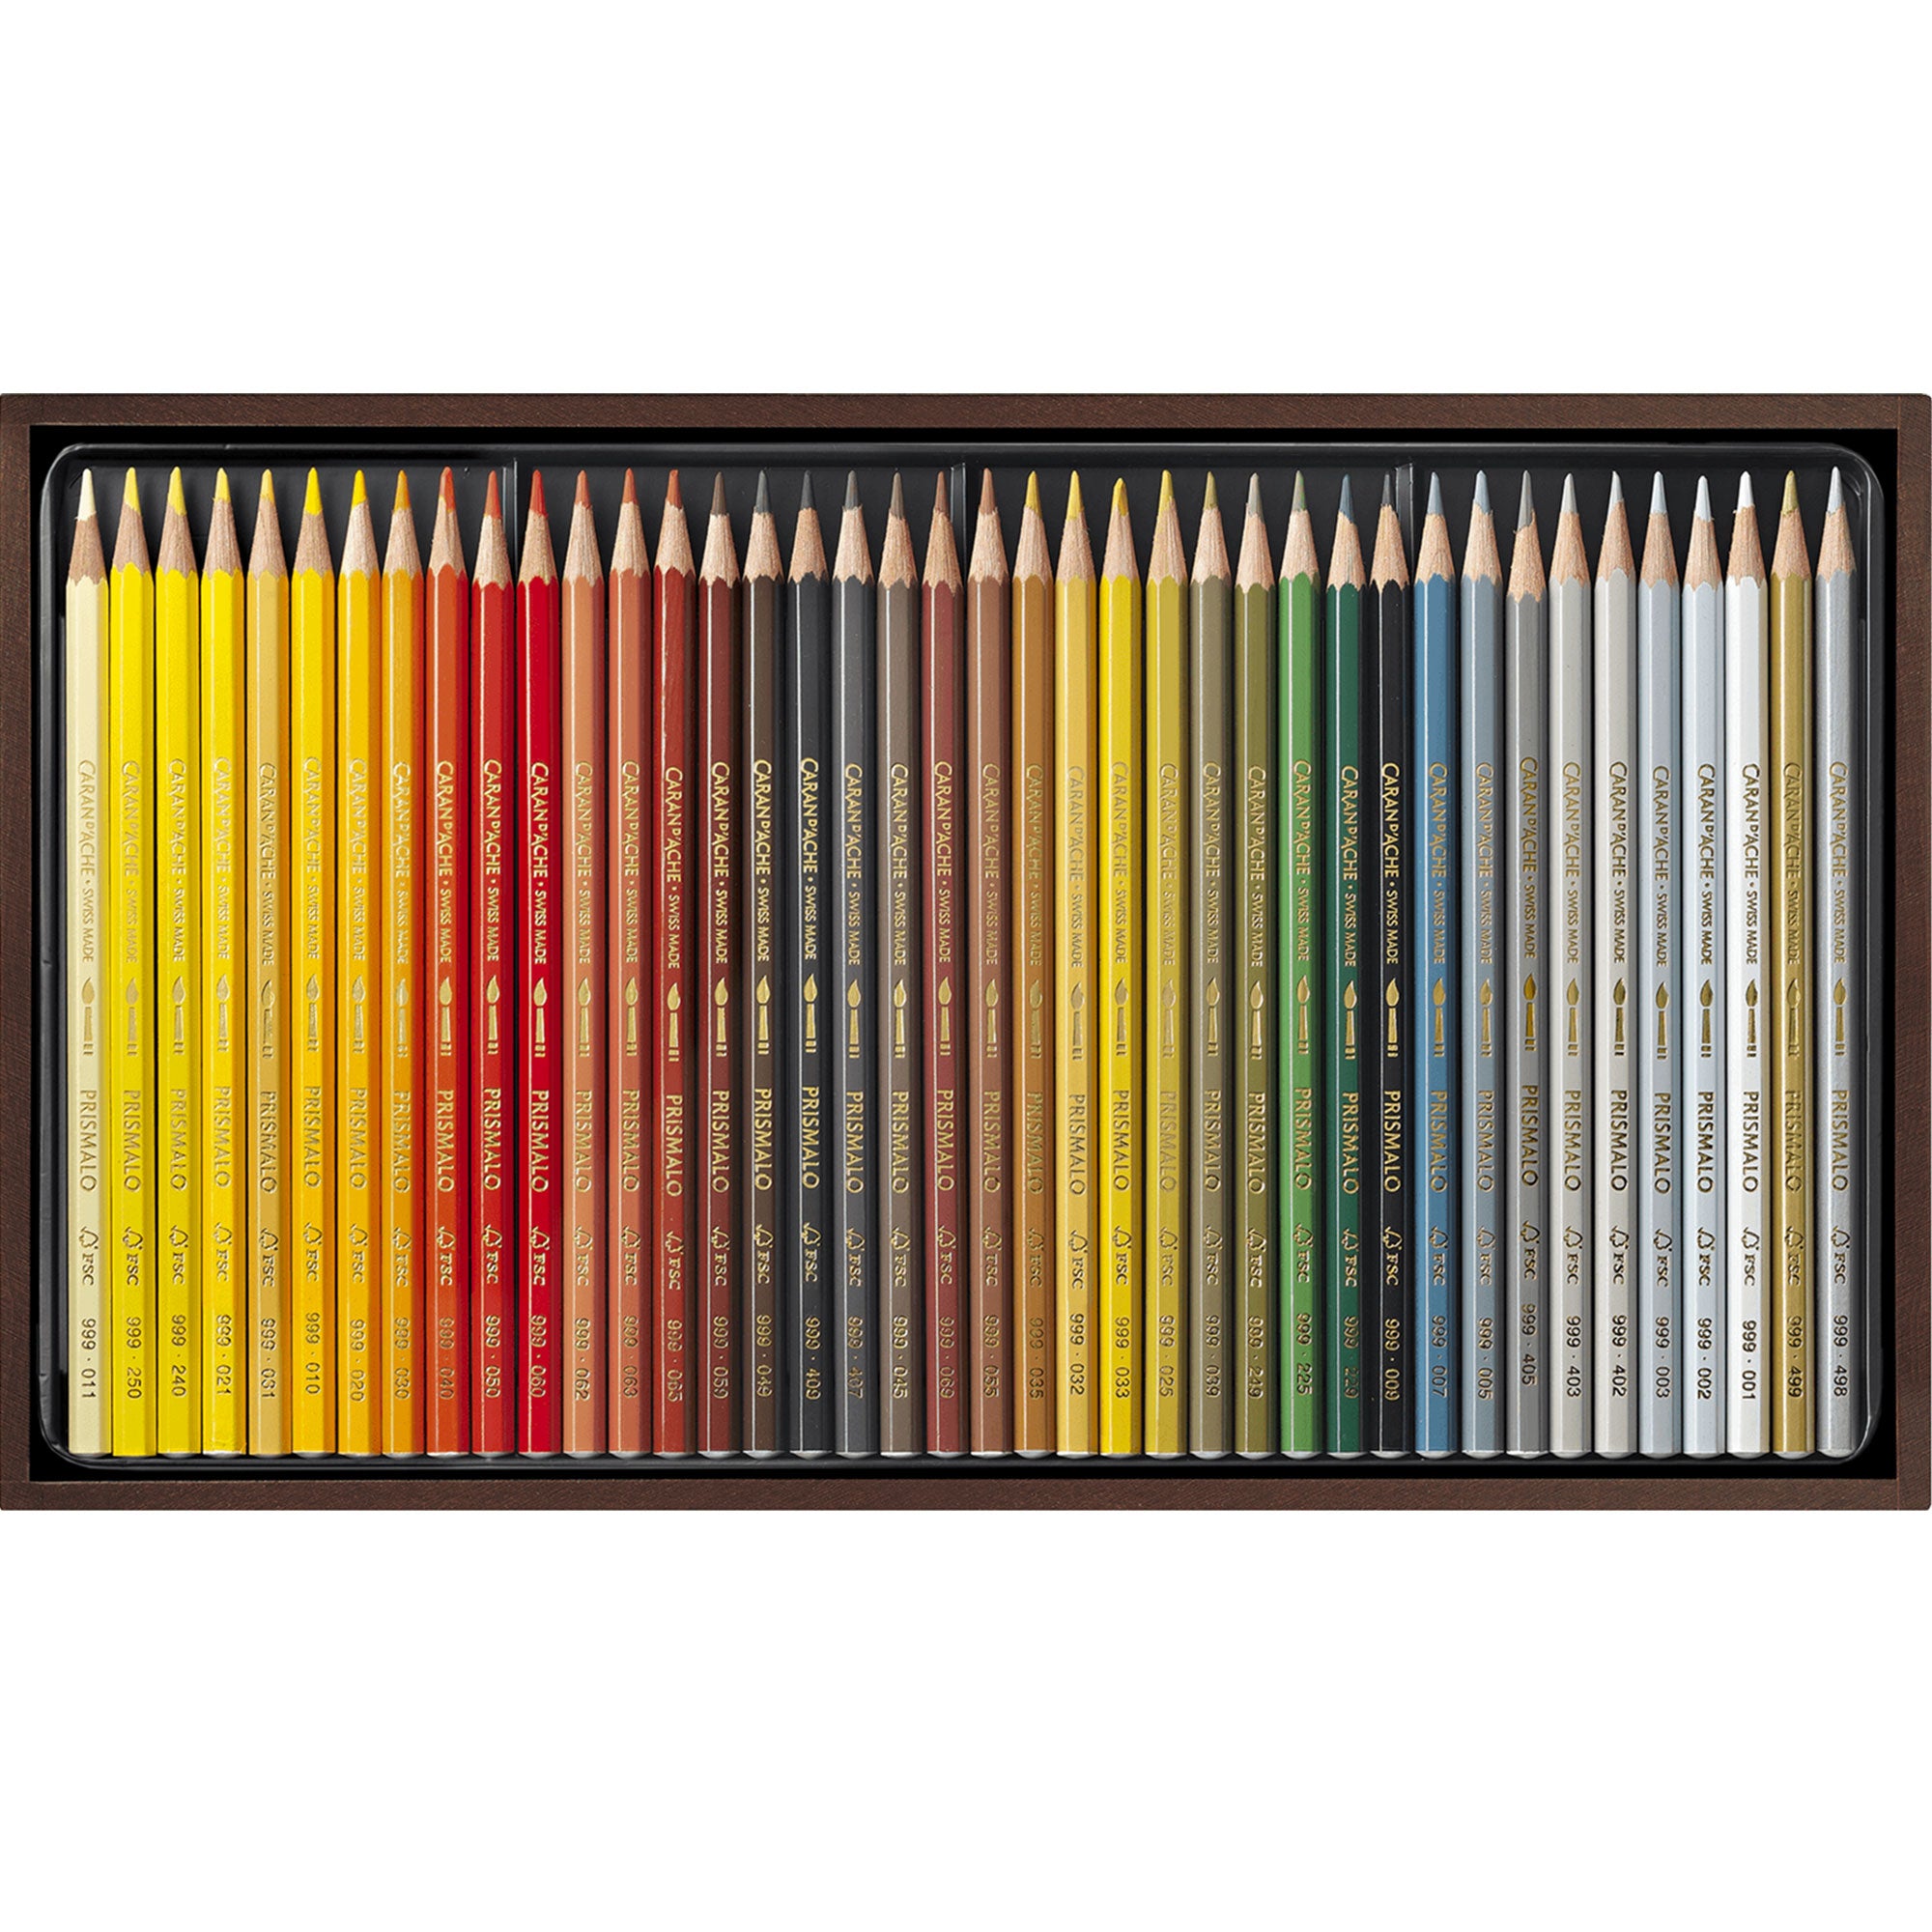 240-Color Professional Colored Pencils for Artists - UK